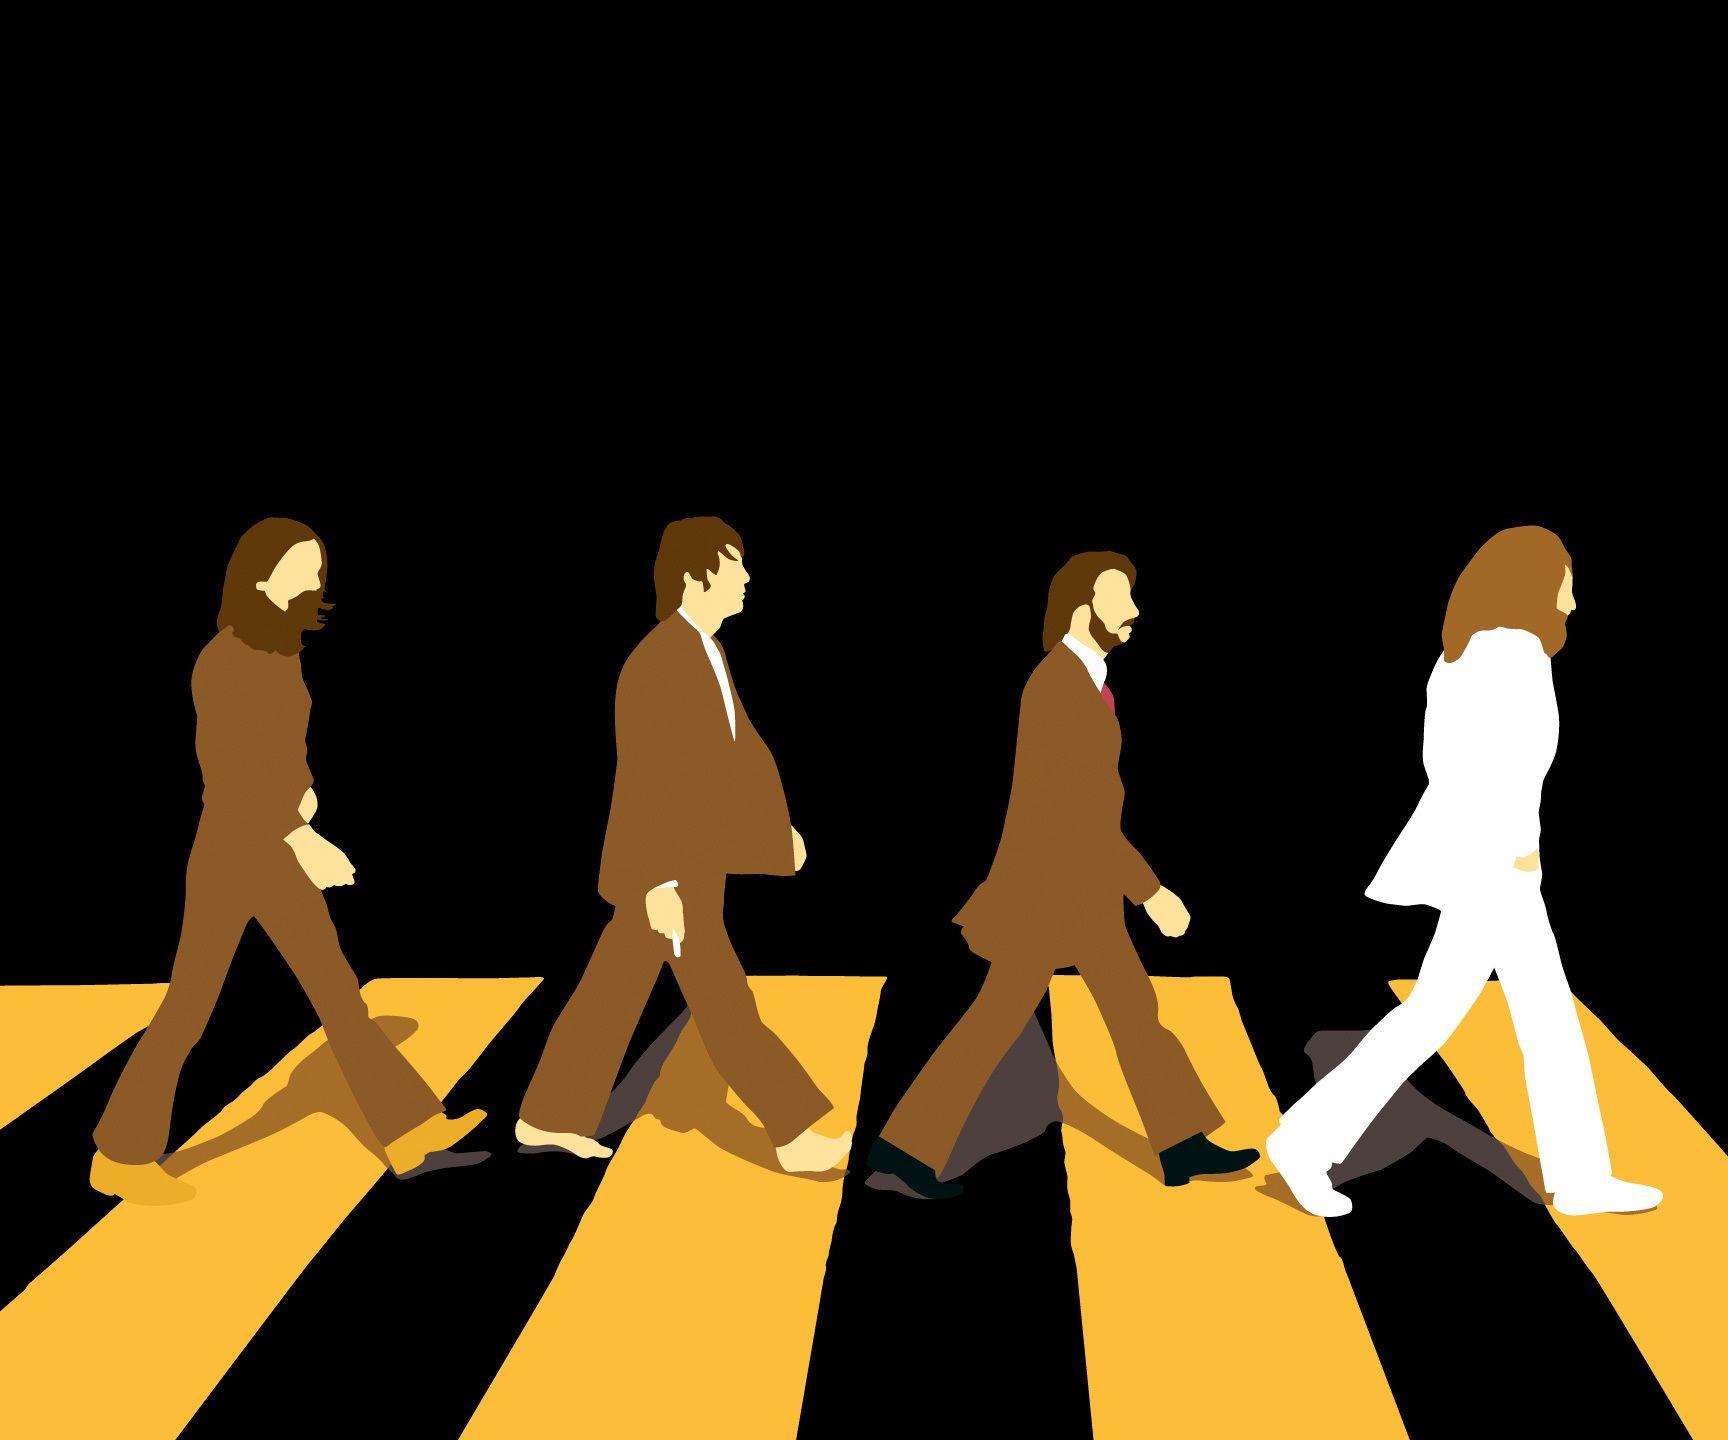 The Beatles wallpaper. The Beatles background